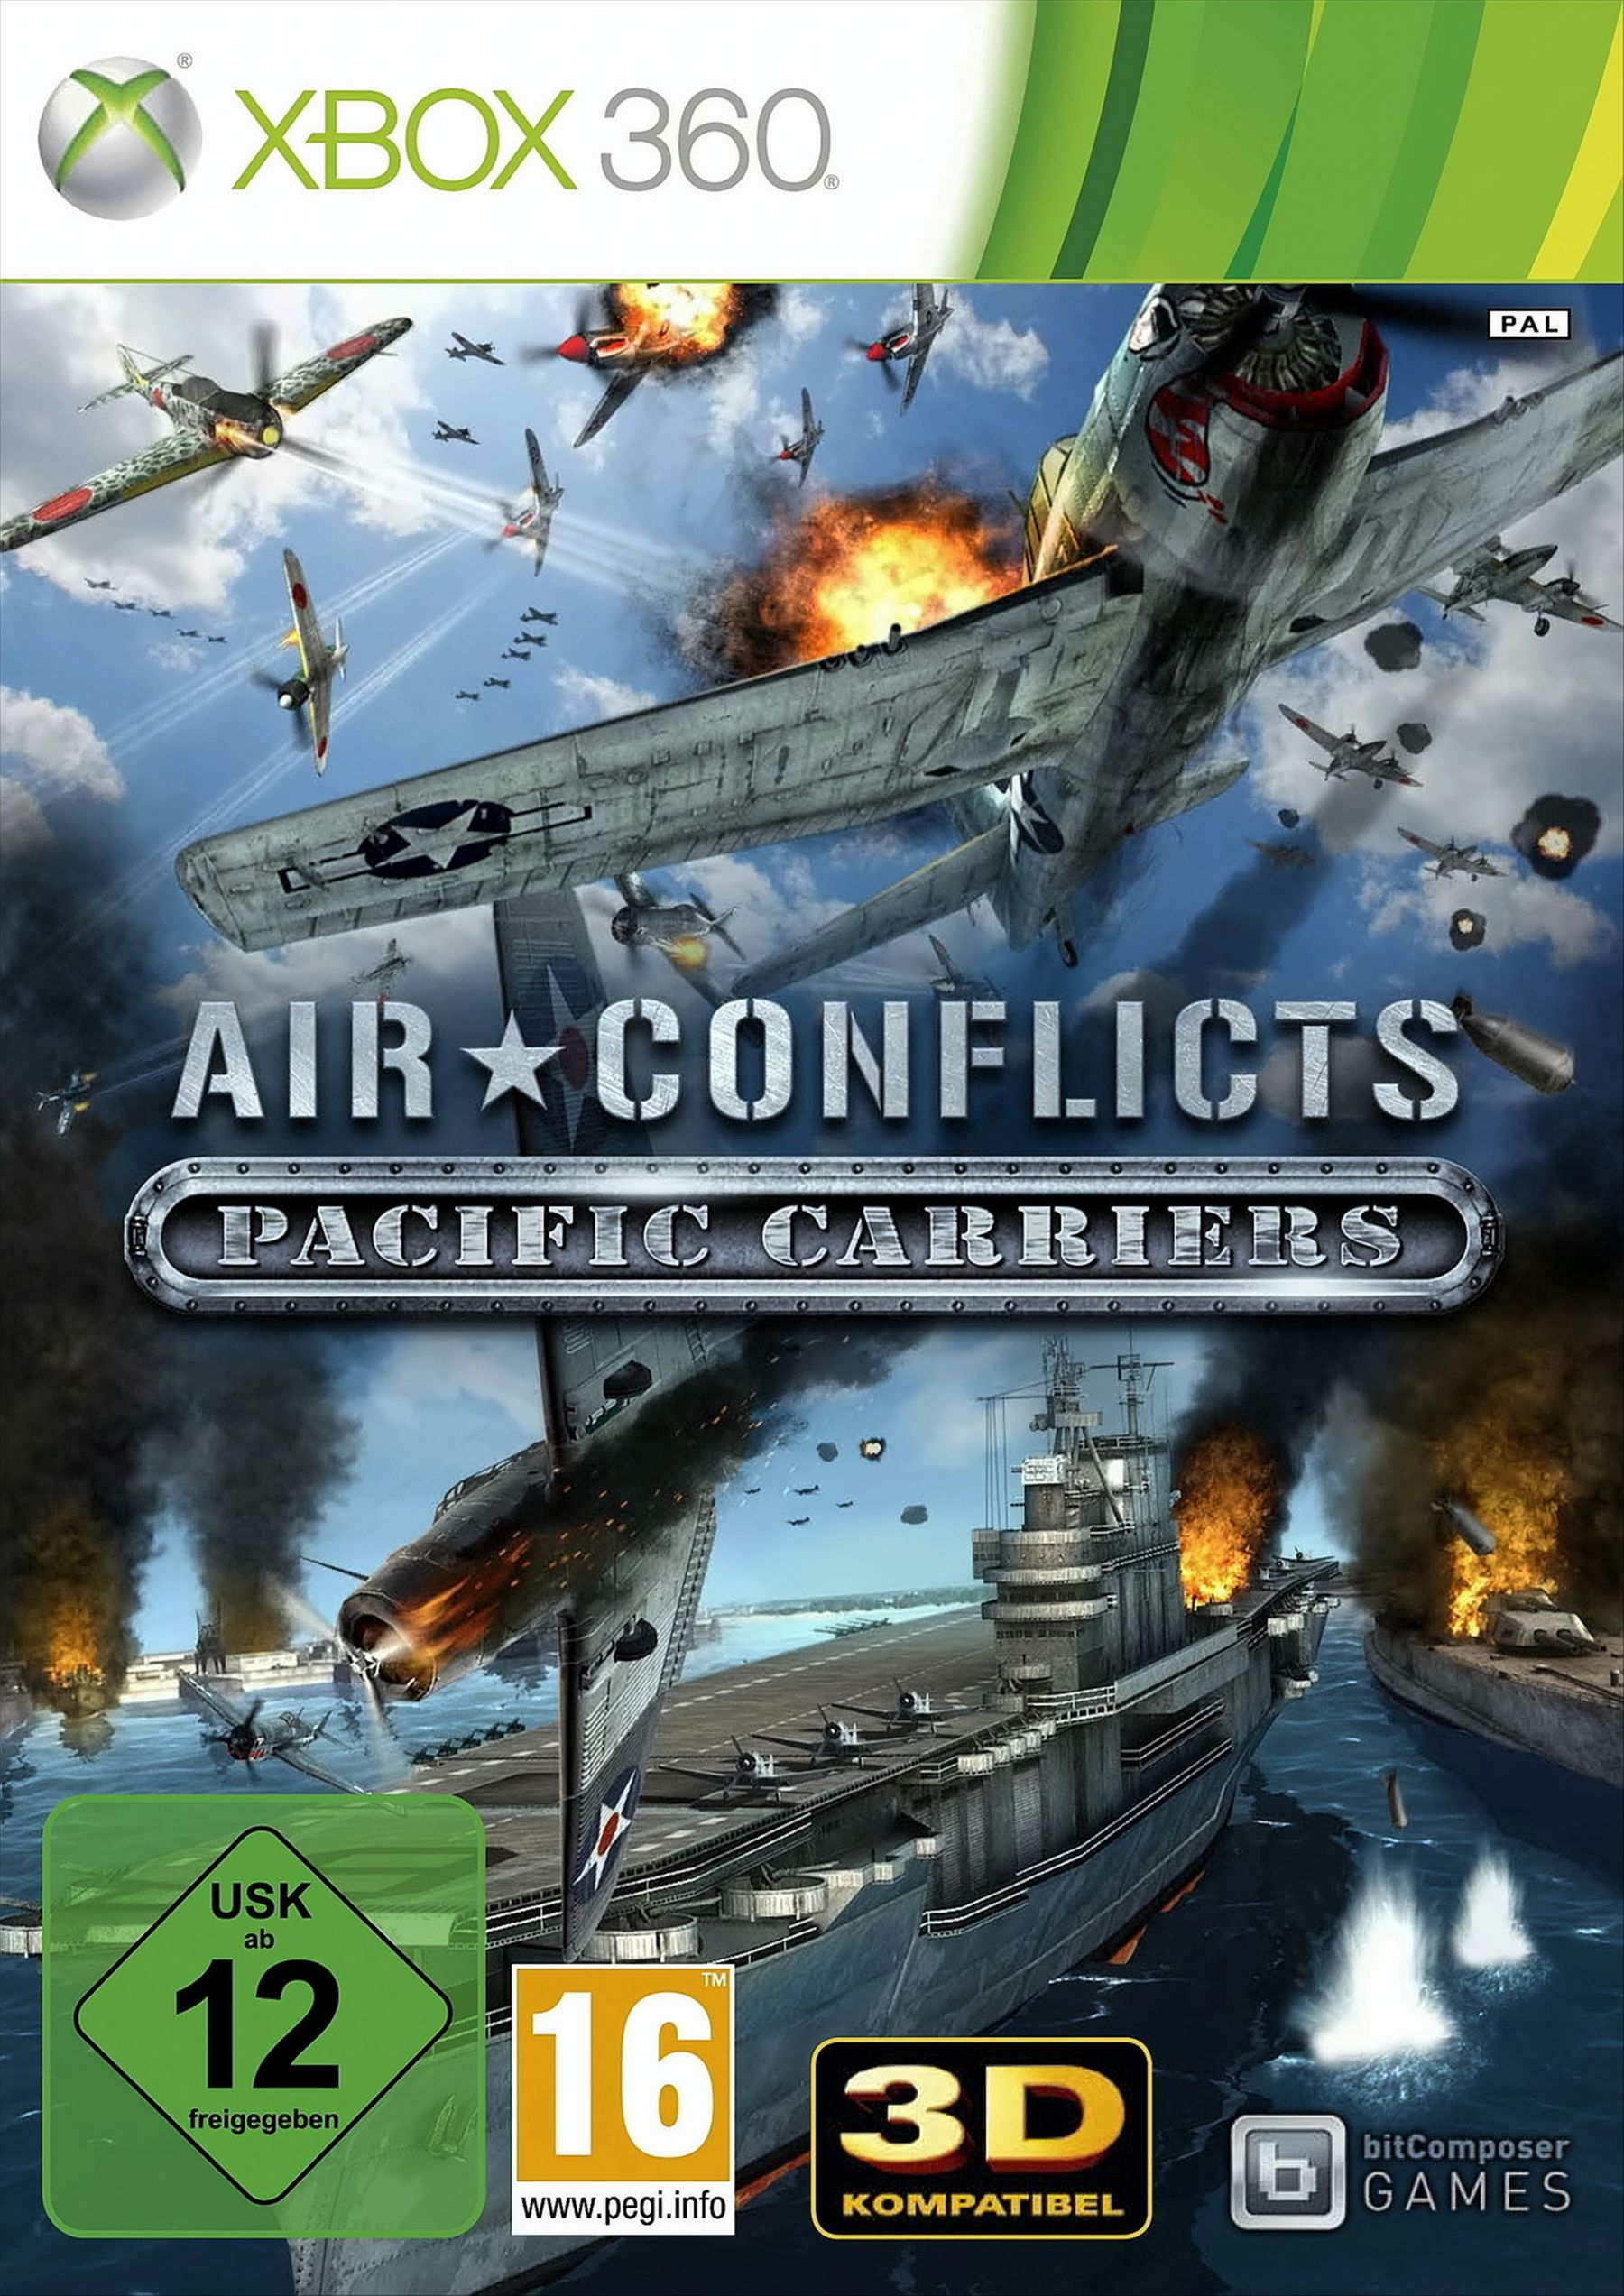 Conflicts: Air - [Xbox 360] Carriers Pacific